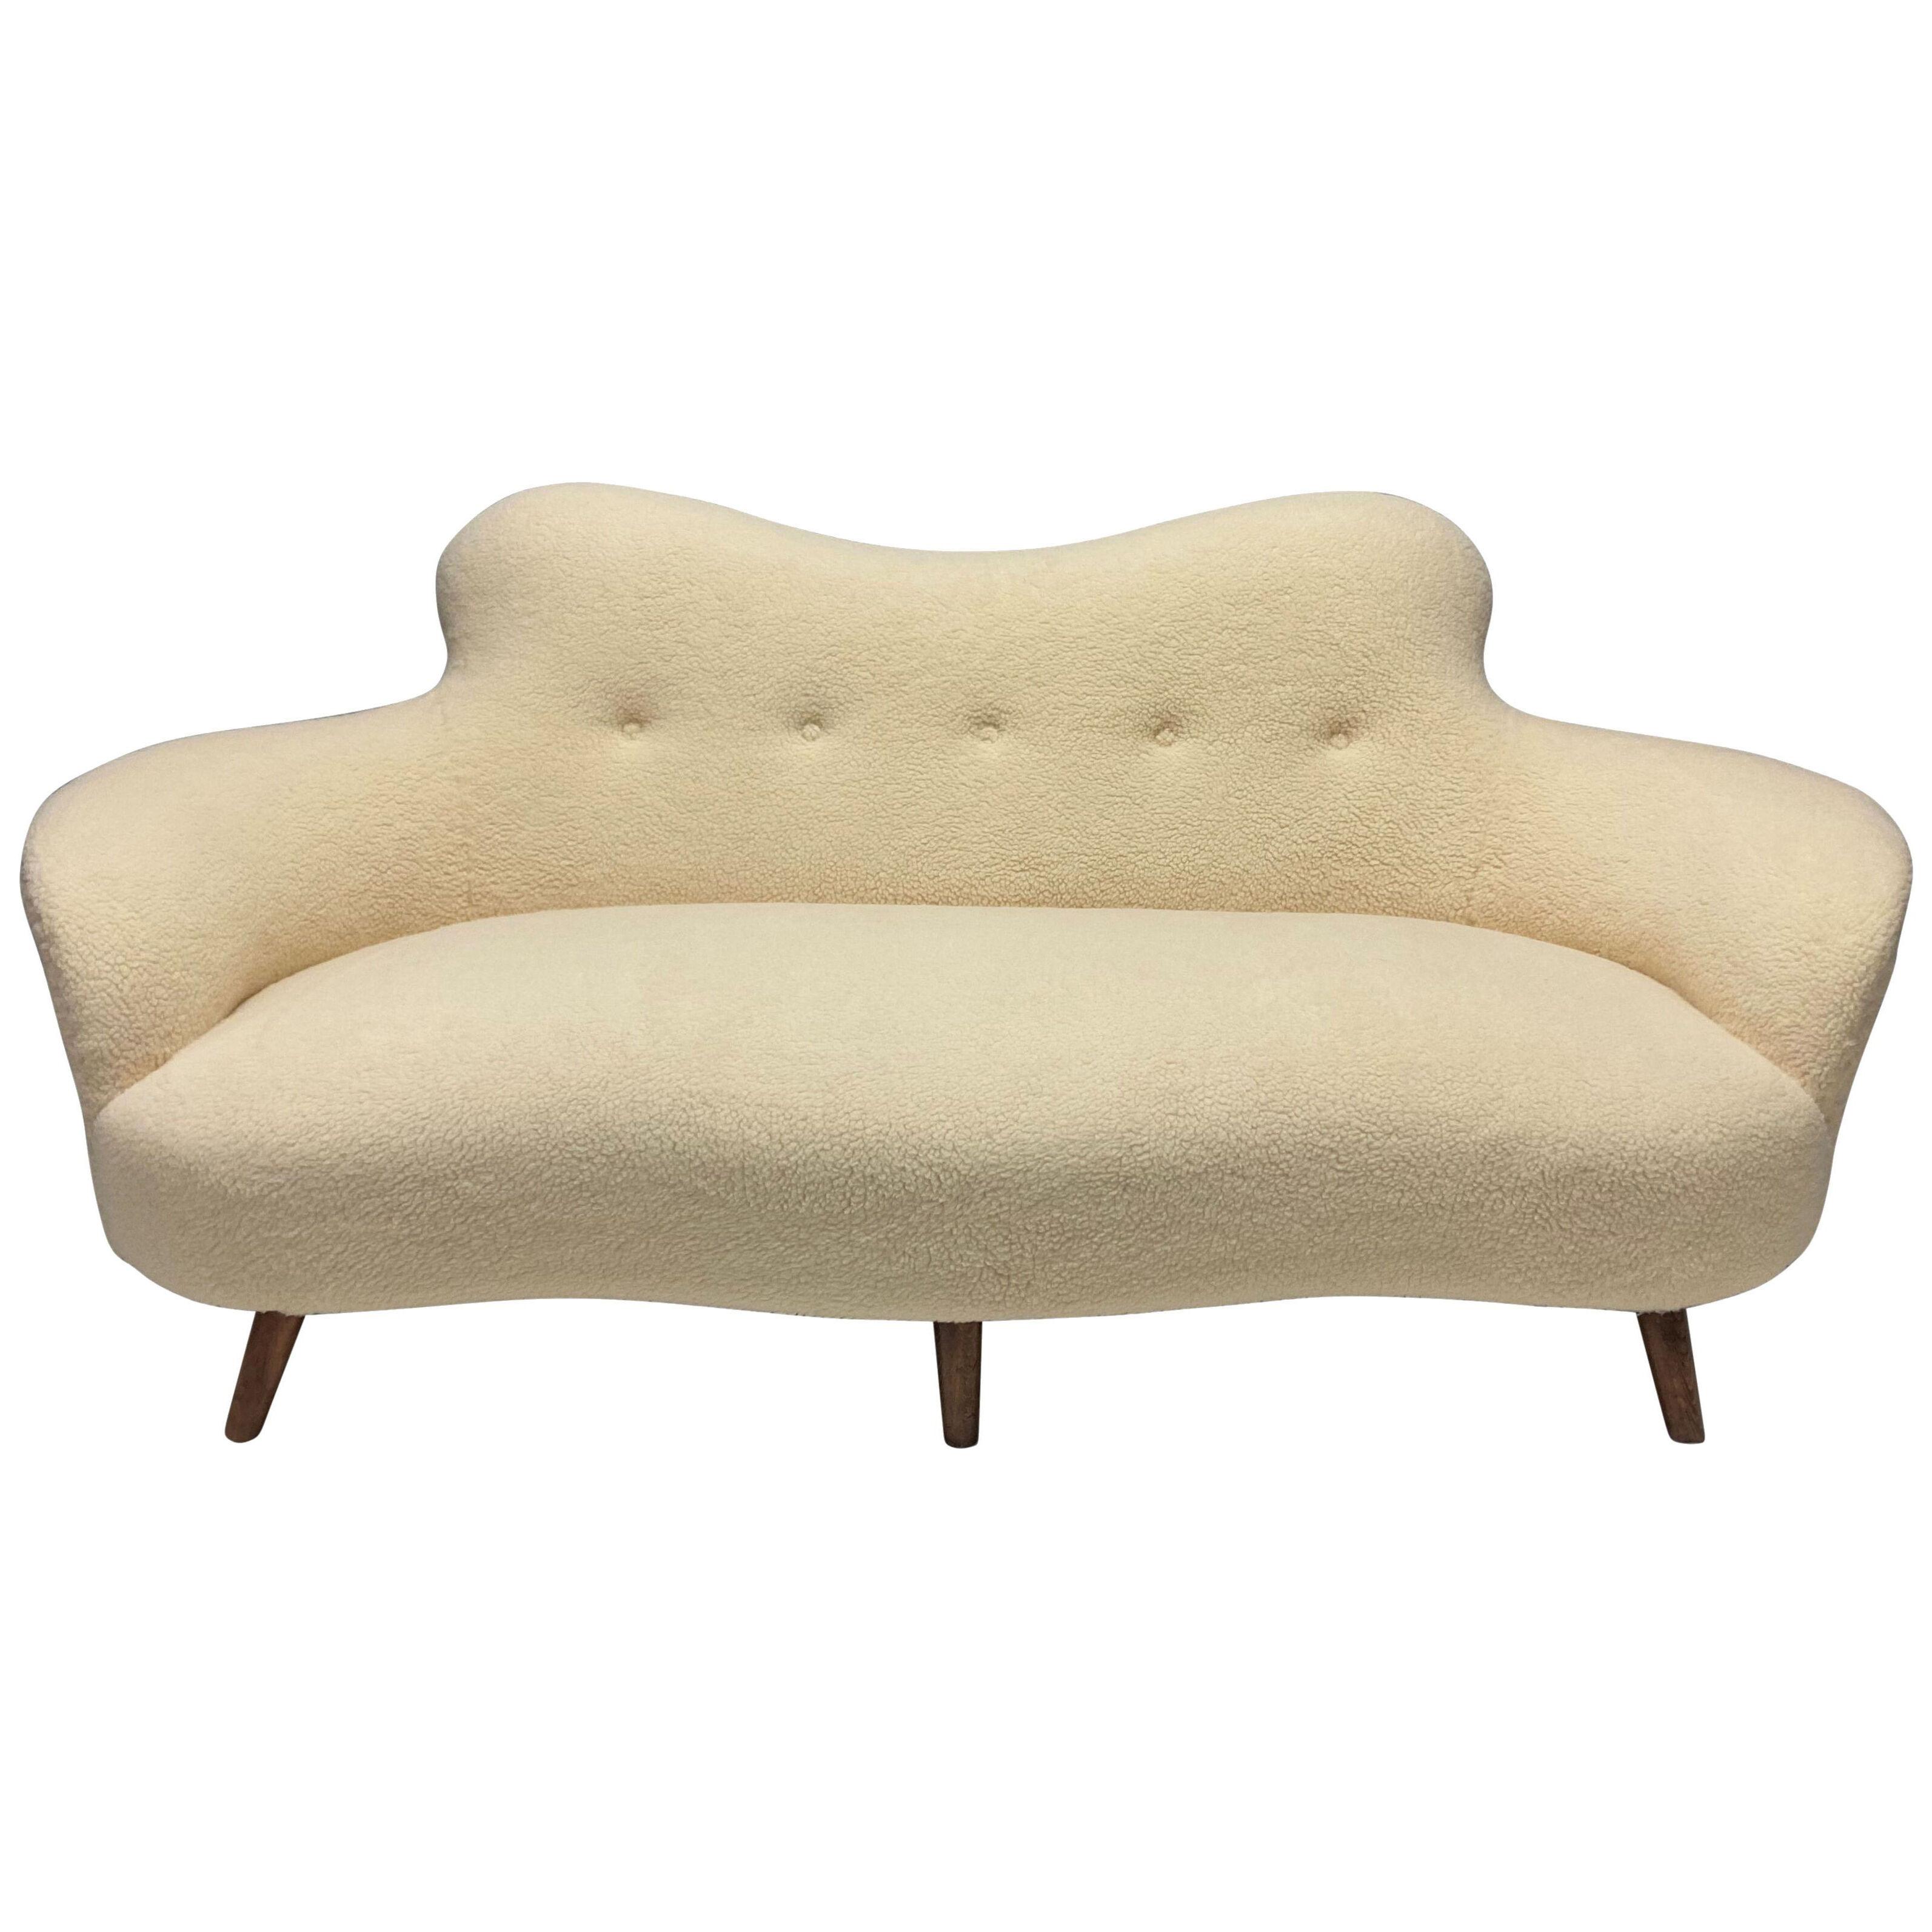 A SCULPTURAL MID-CENTURY ITALIAN SOFA IN FAUX LAMBSWOOL